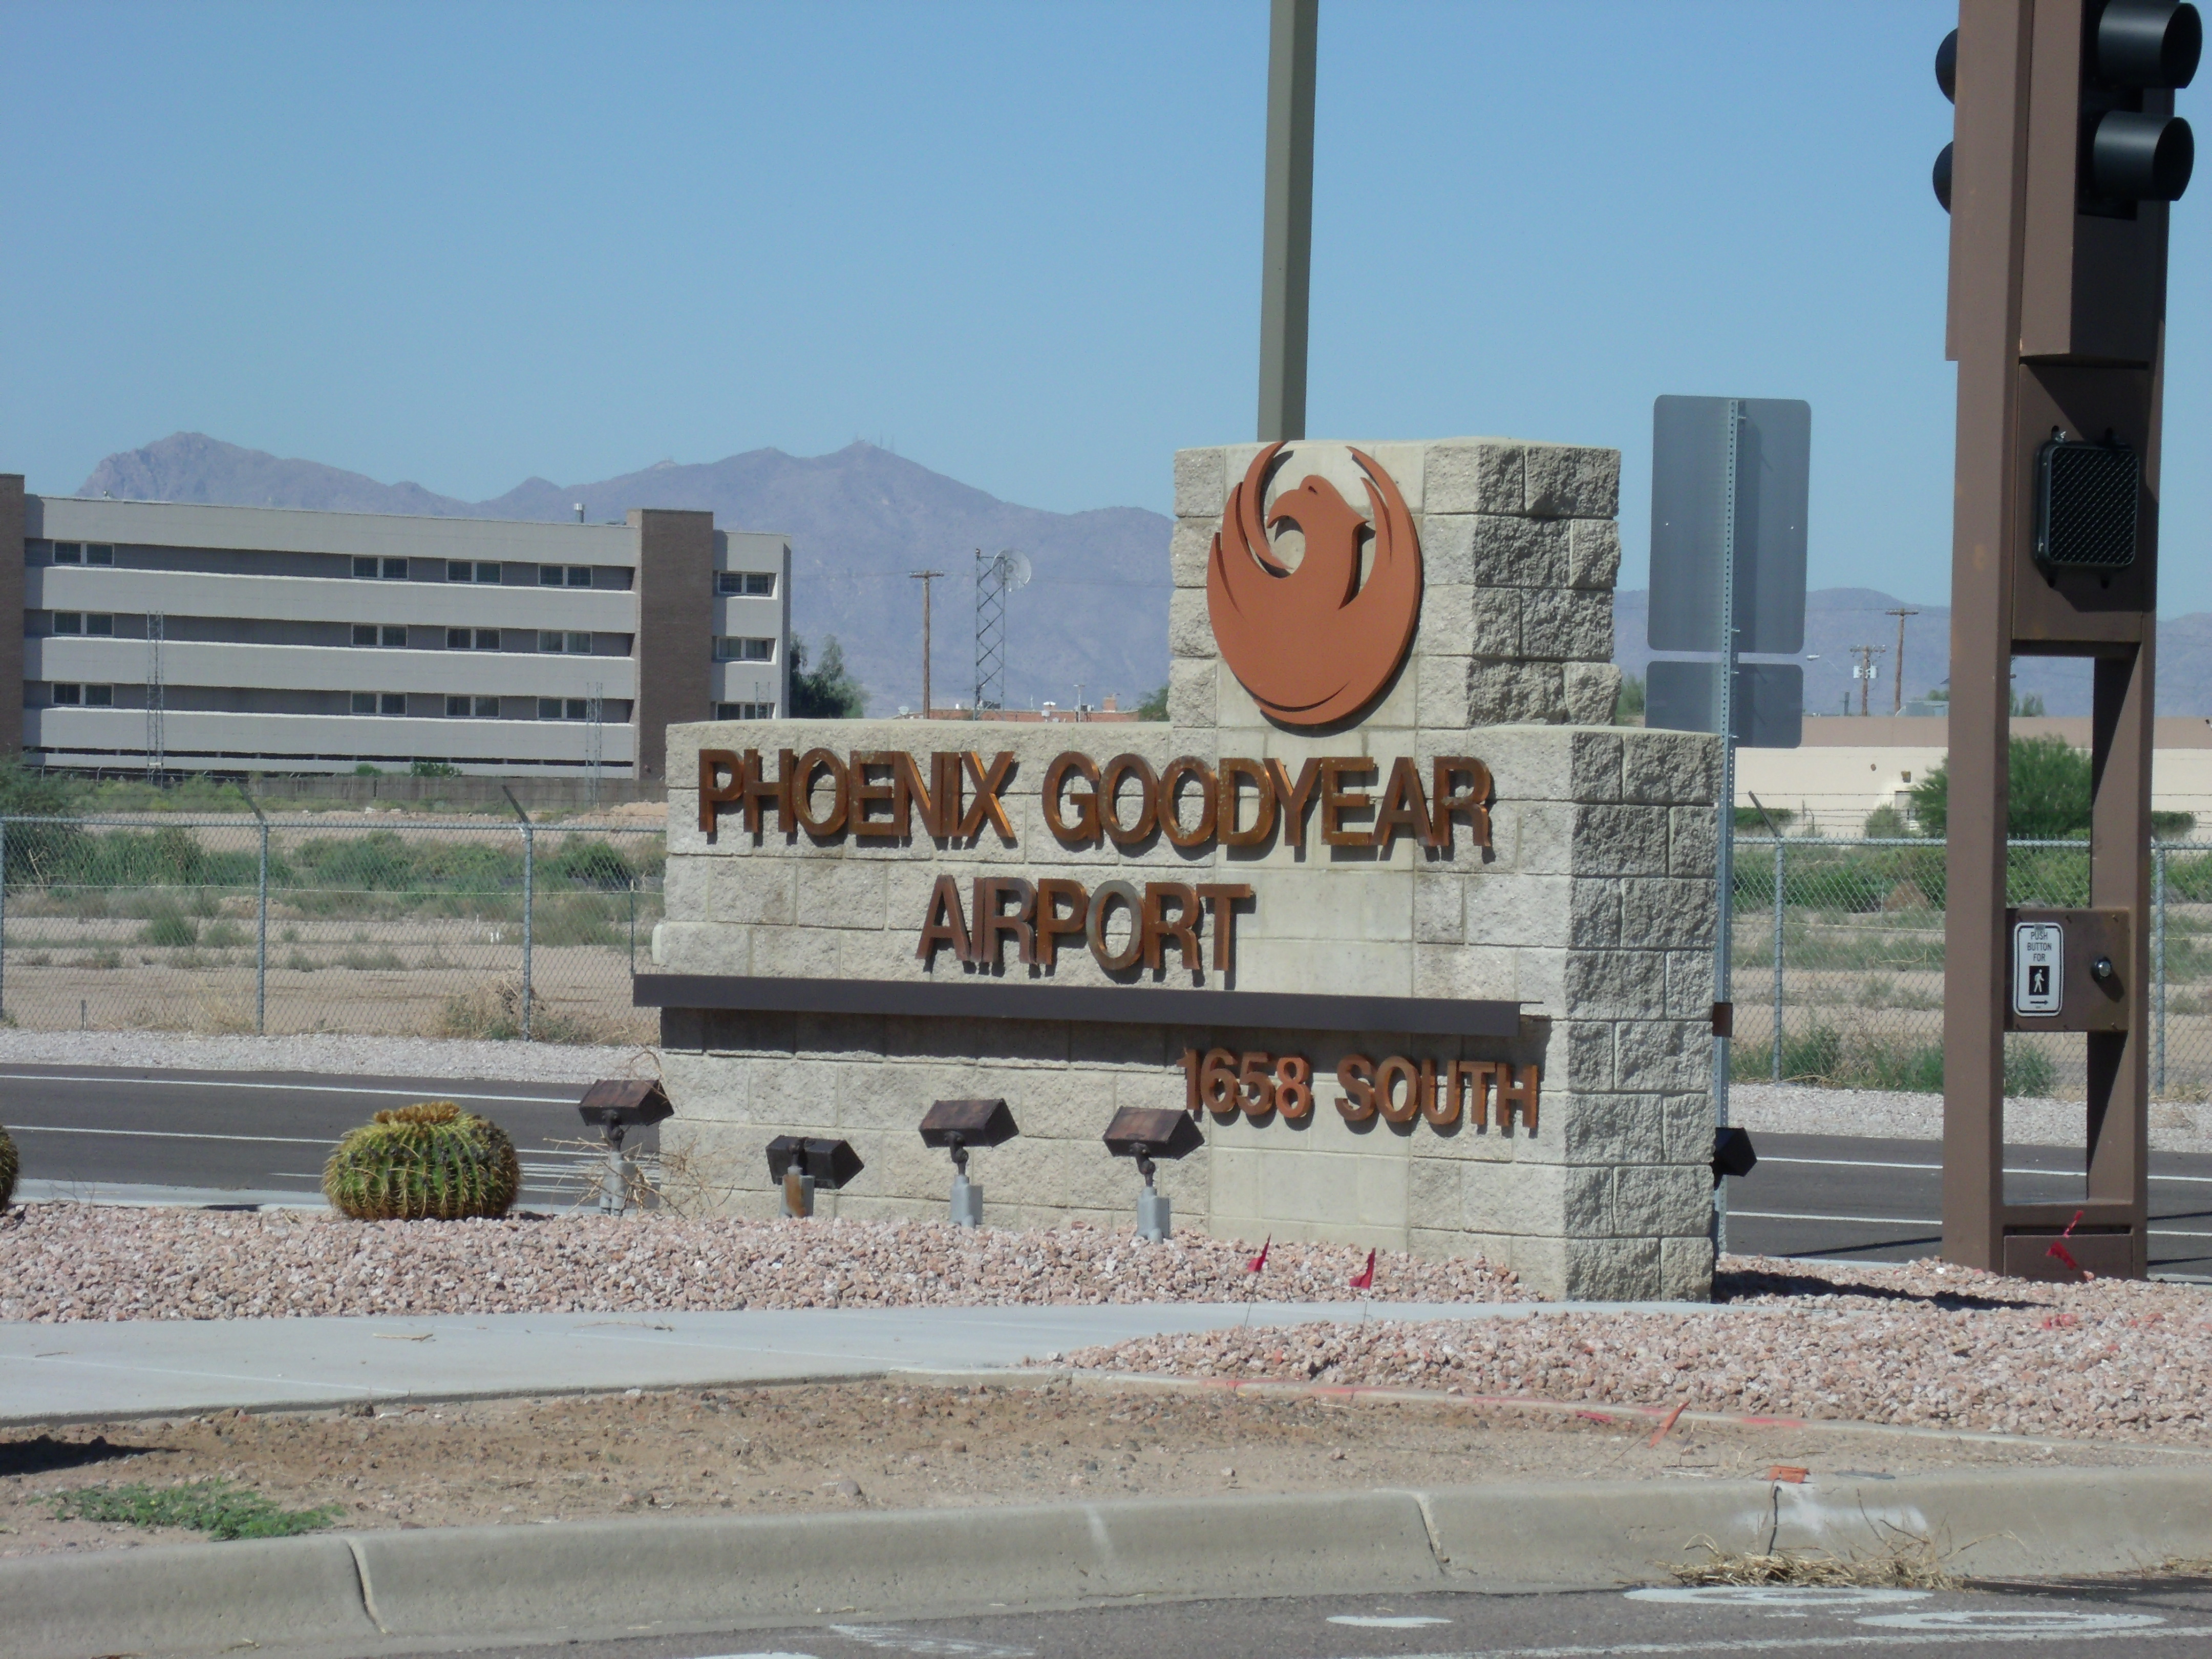 Discover the Fascinating History of the Phoenix Goodyear Airport in Goodyear, Arizona, USA